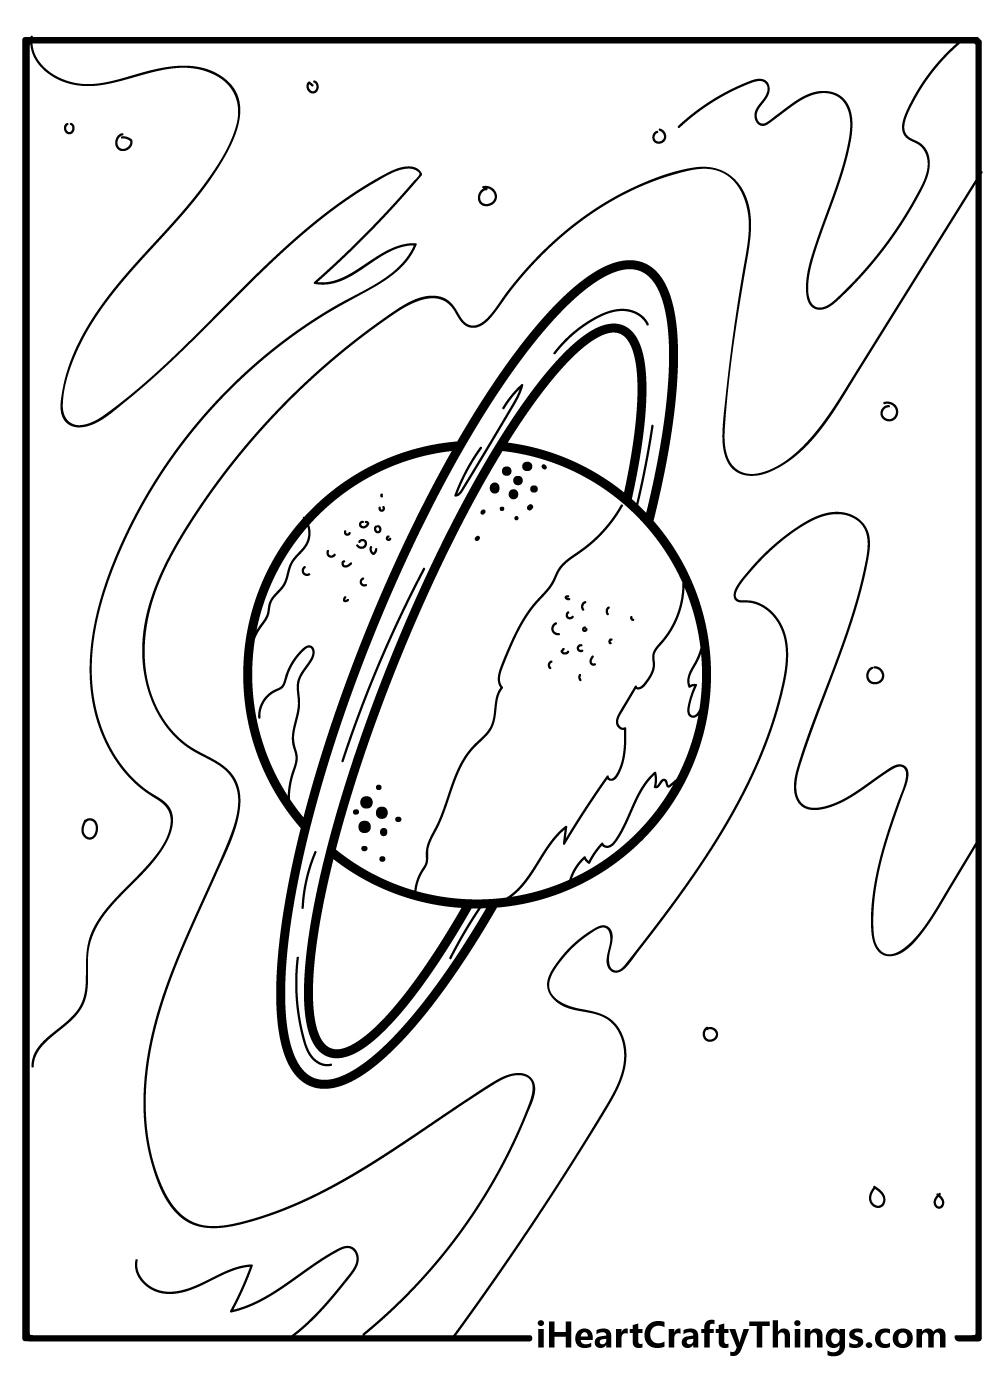 Planets Coloring Sheet for children free download